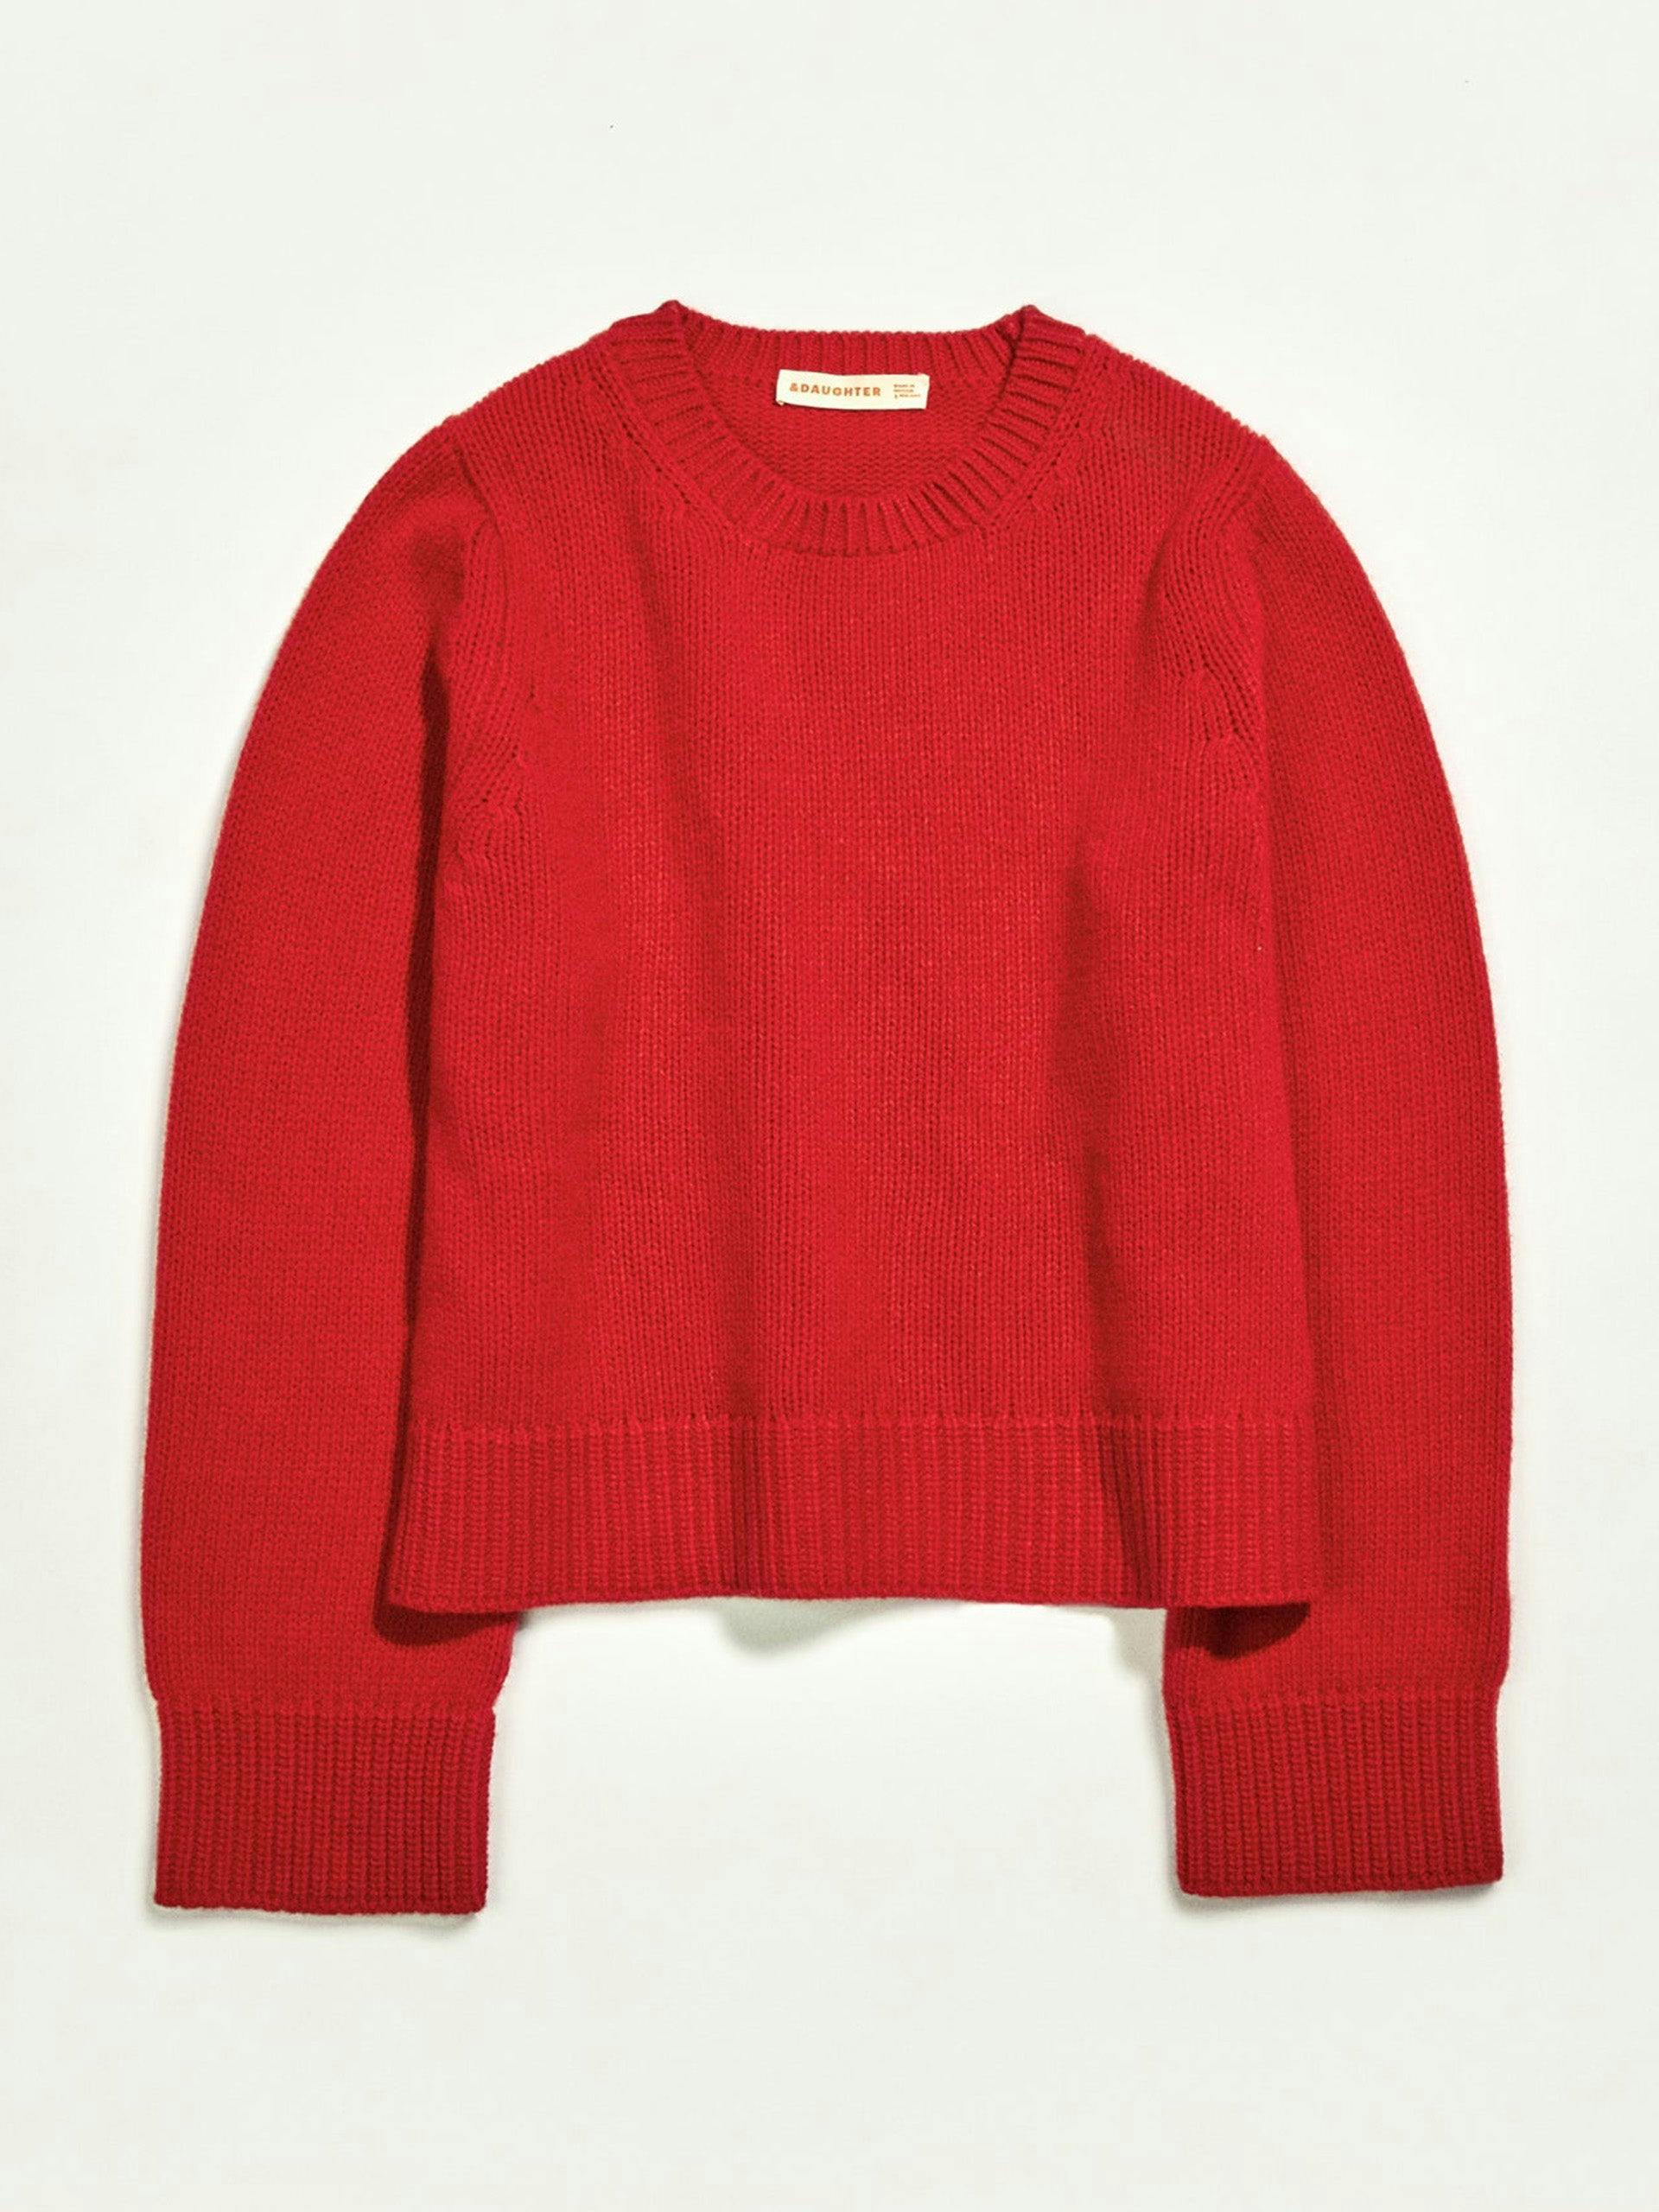 Slouch wool/cashmere crewneck in red